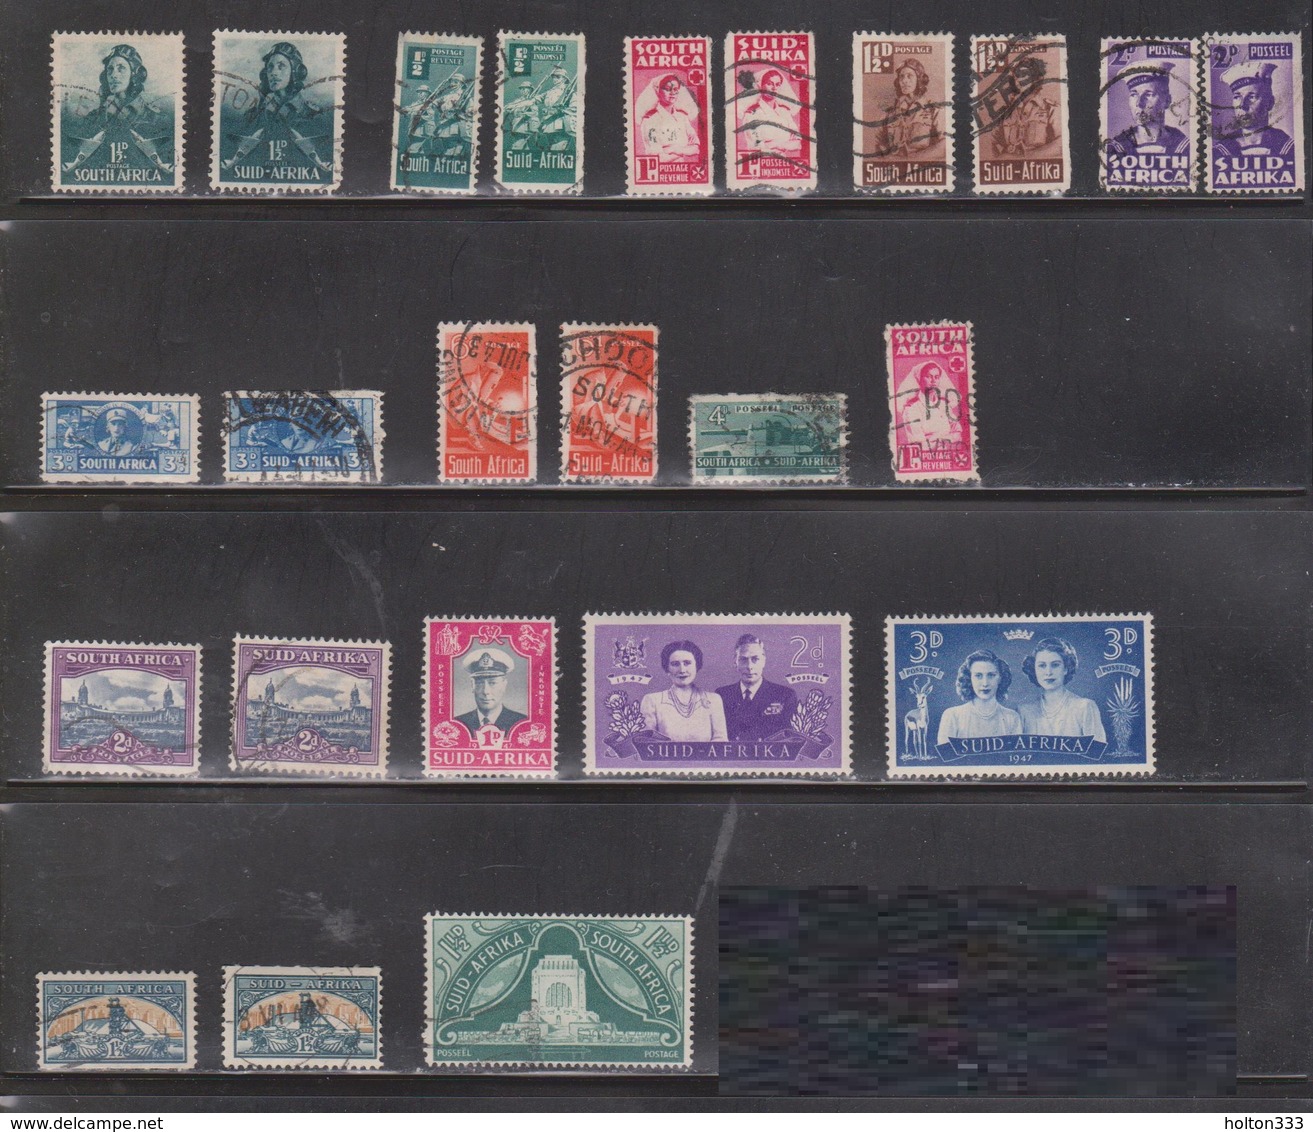 SOUTH AFRICA Collection Of Used - Good Variety - Some Duplication - Used Stamps